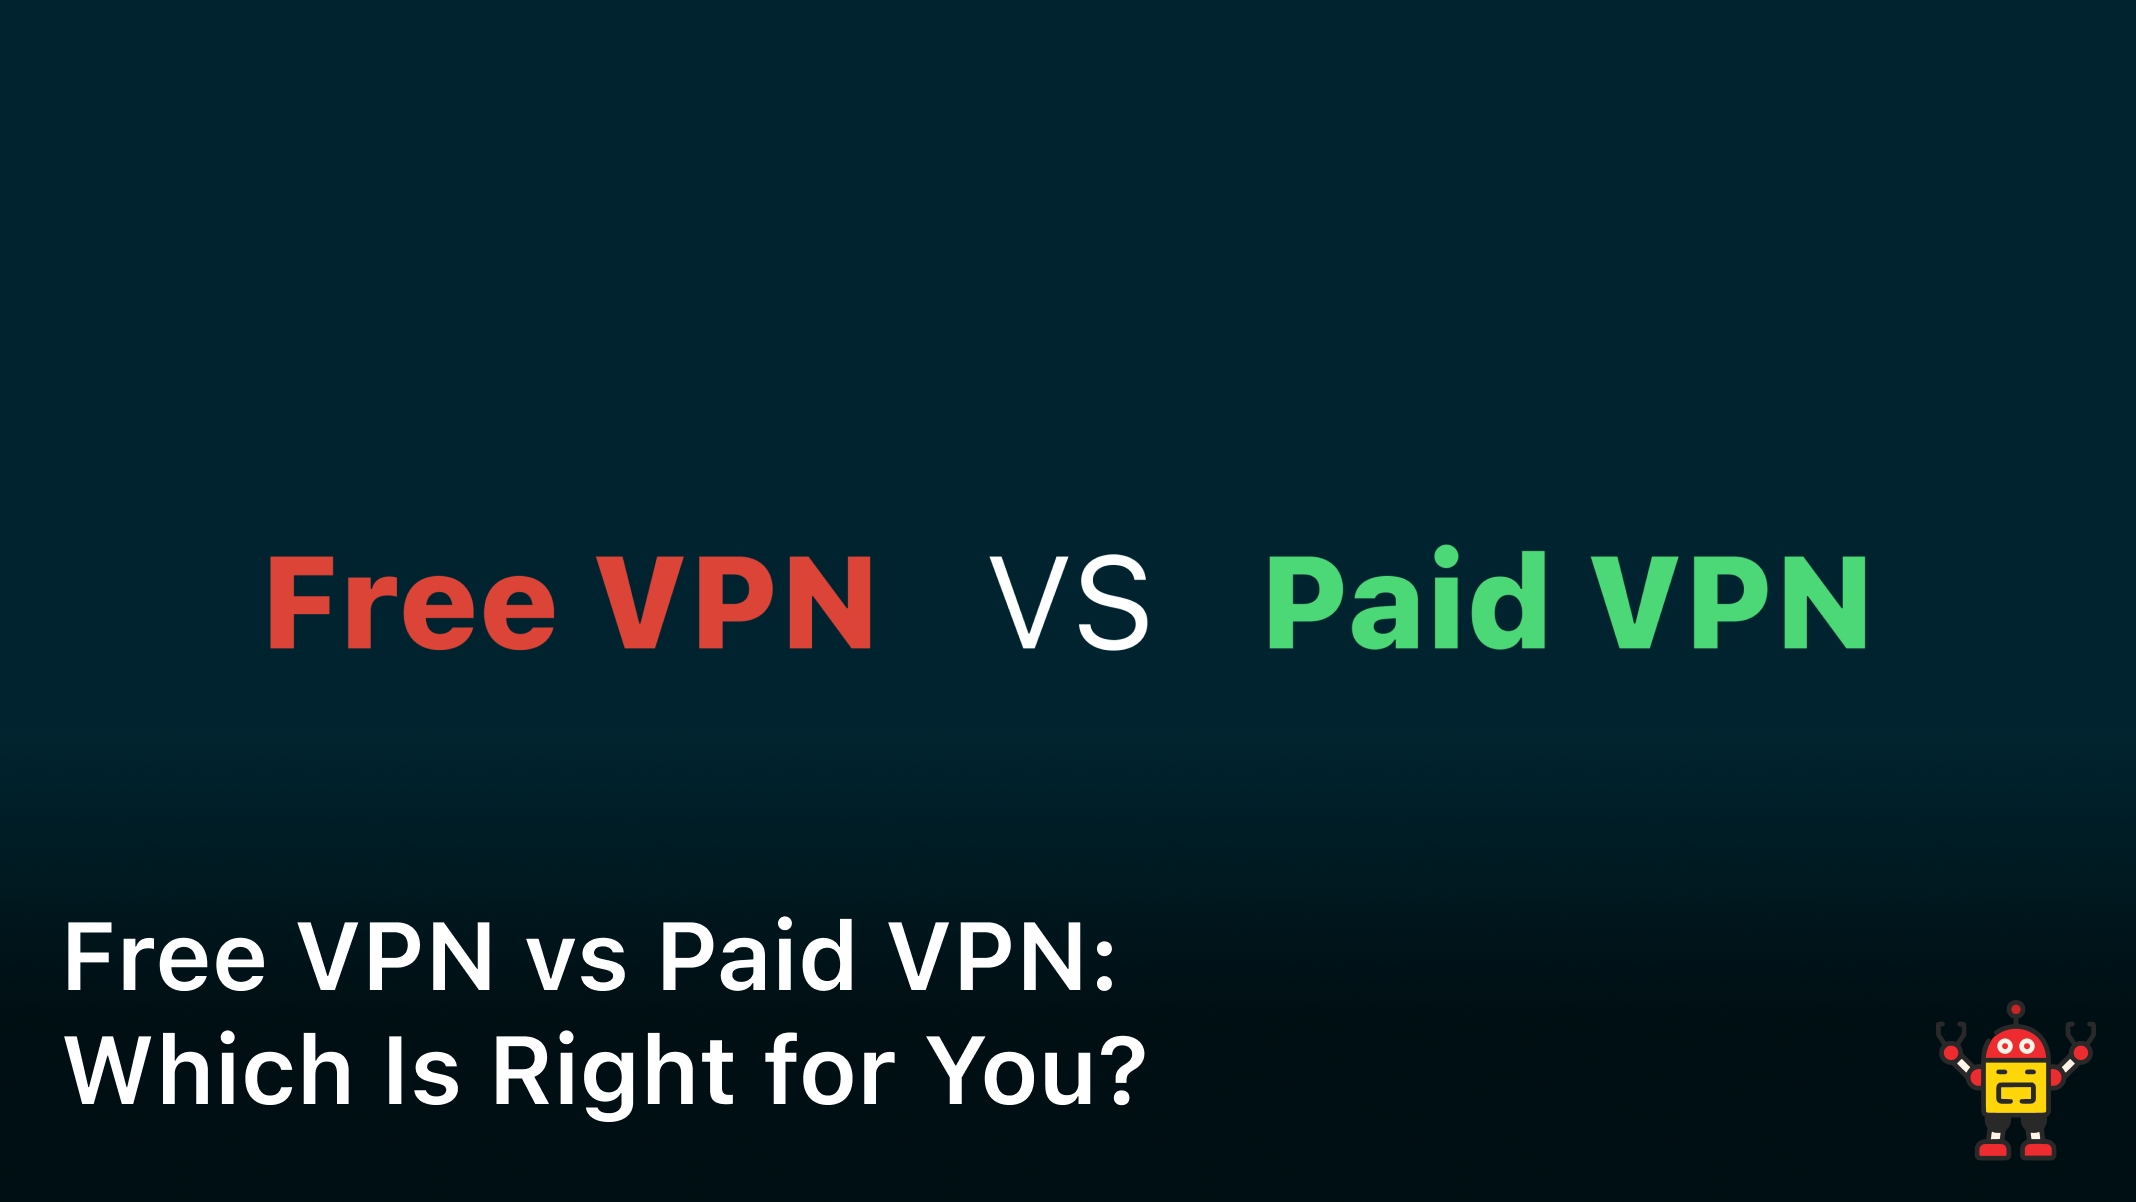 Free VPN vs Paid VPN: Which Is Right for You?